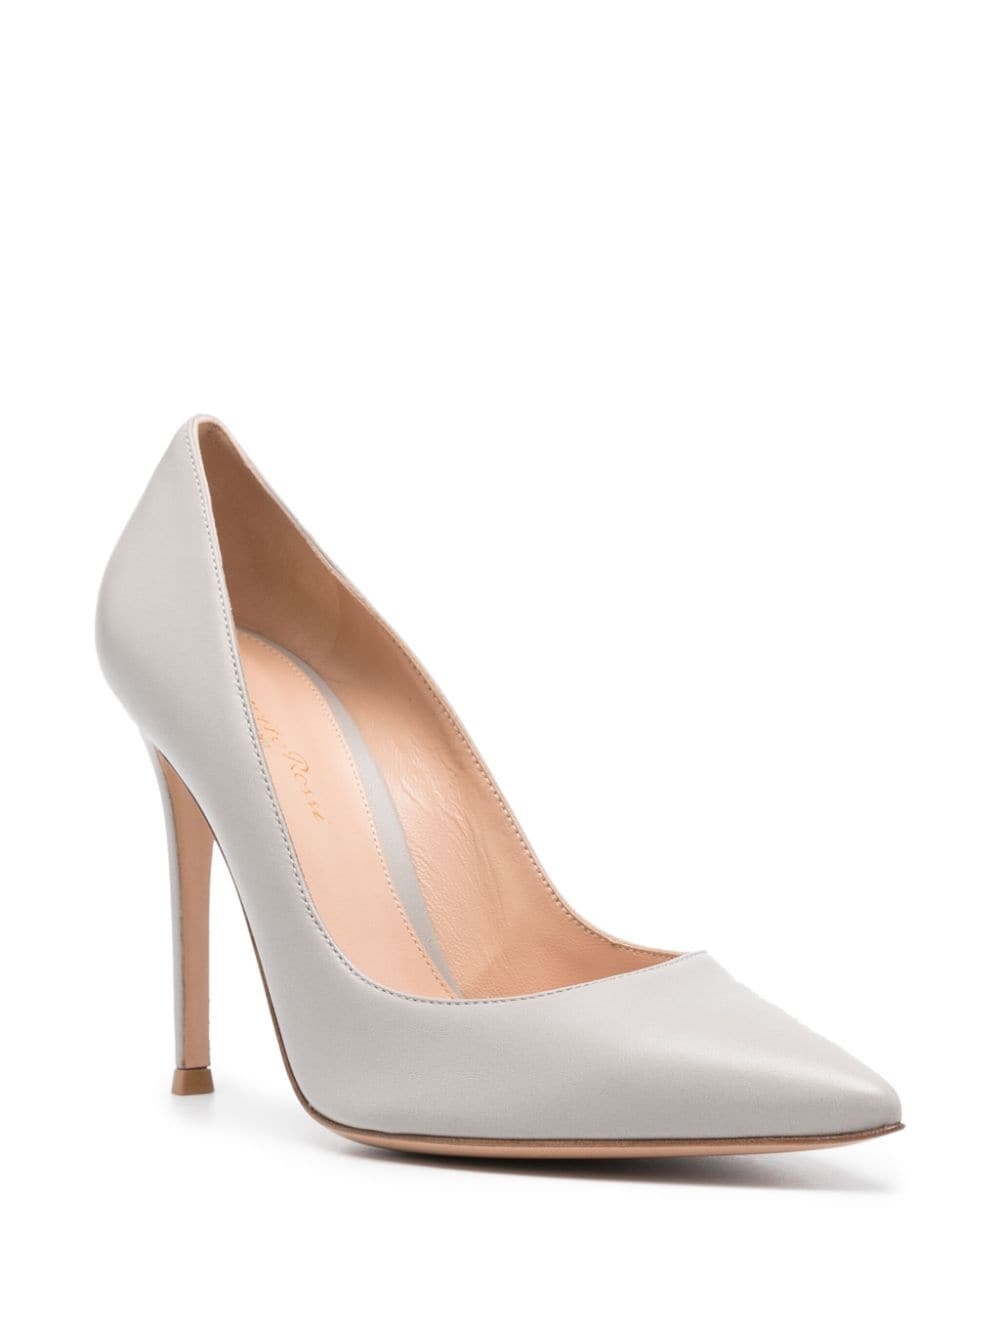 Gianvito 100mm leather pumps - 2